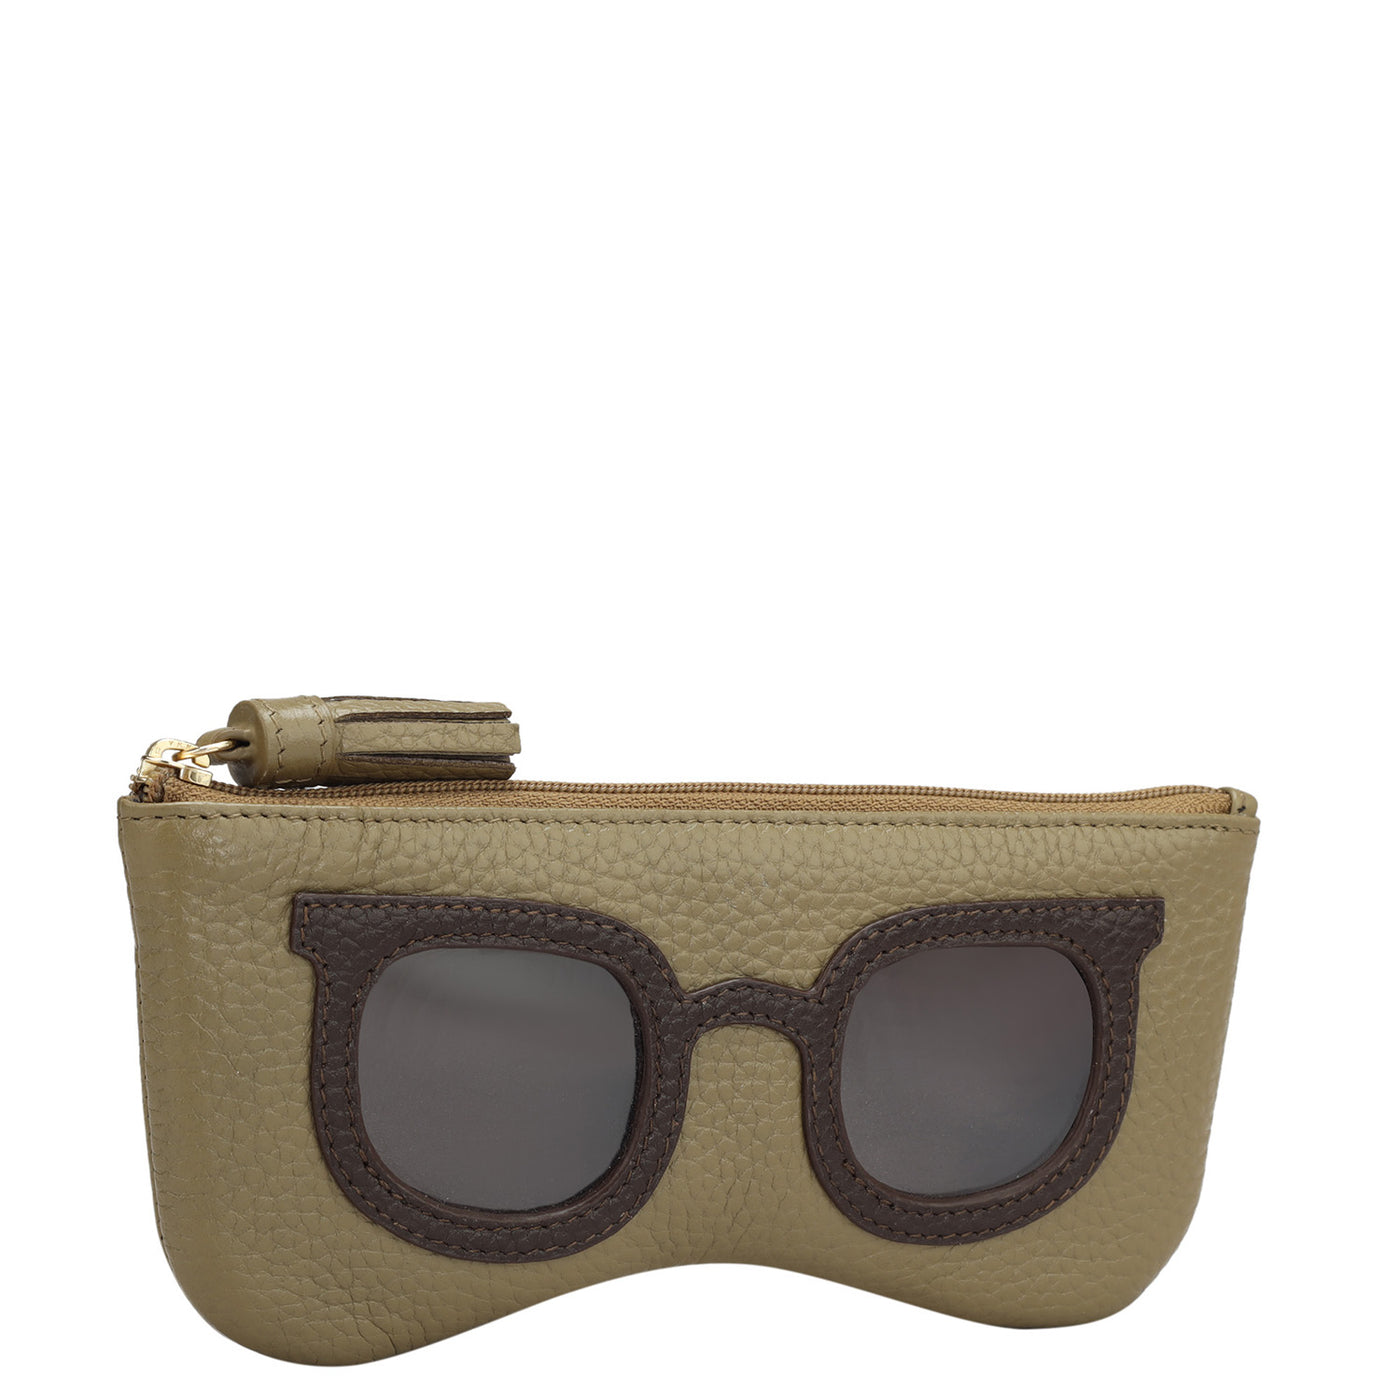 Wax Leather Spectacle Case - Olive